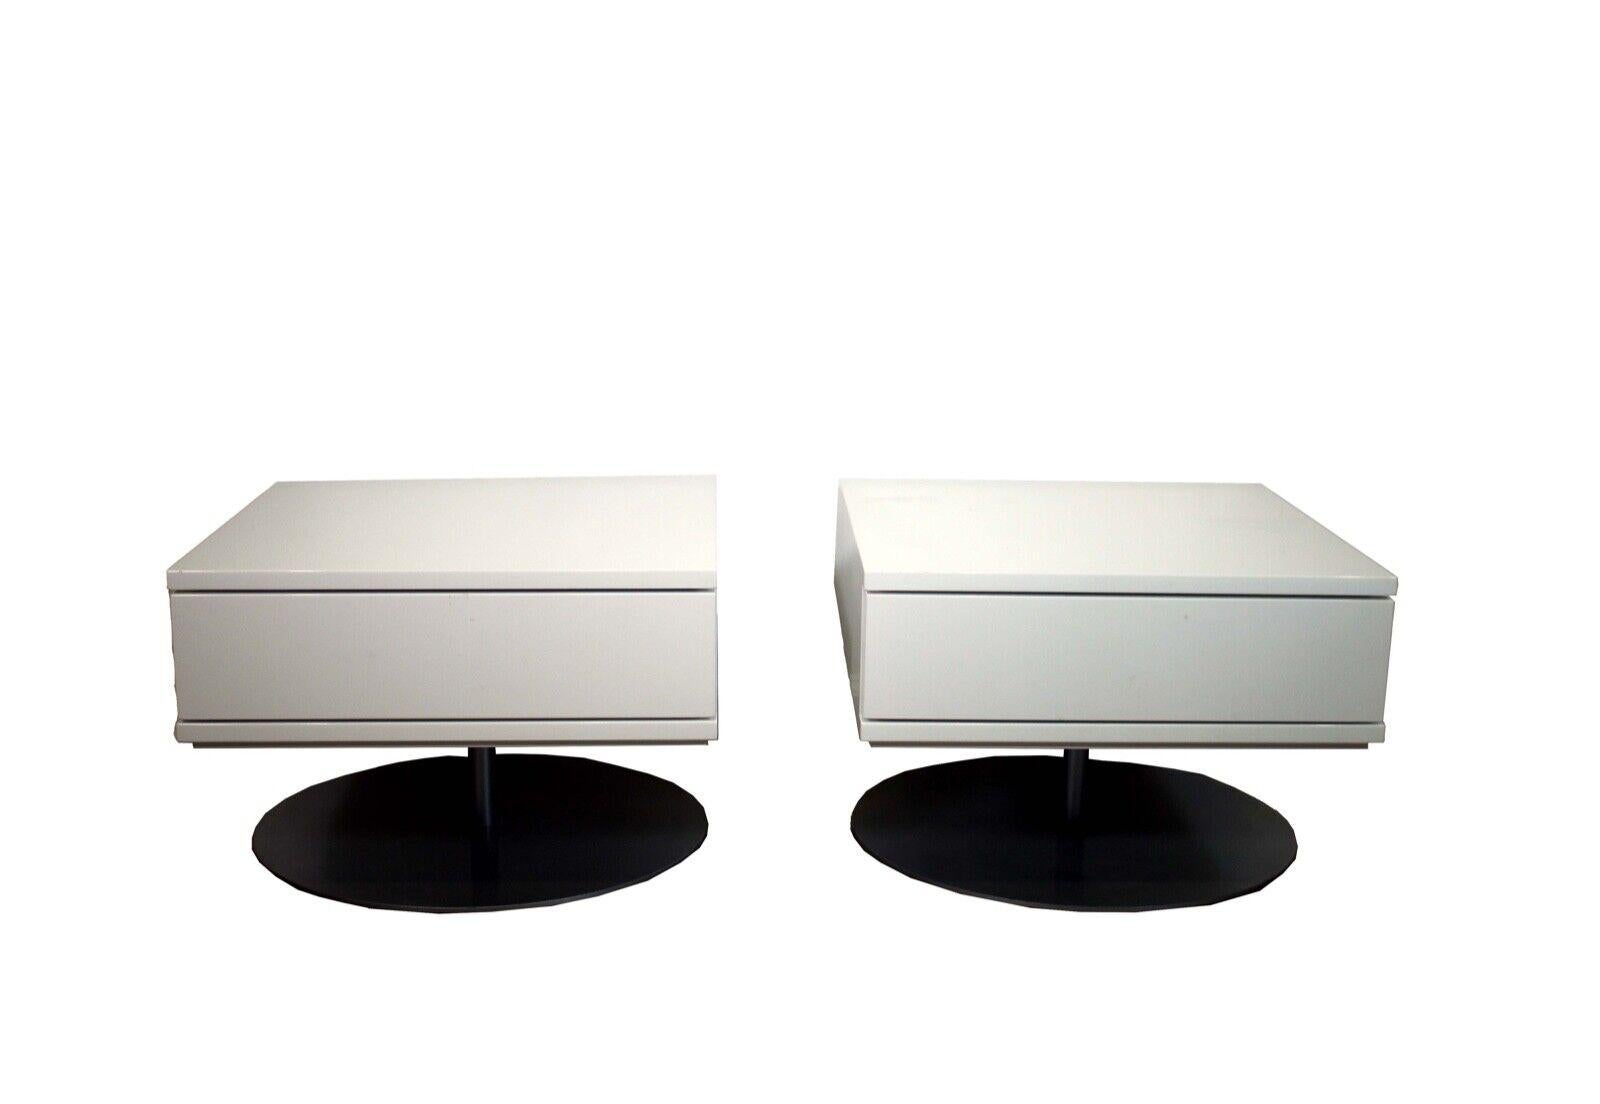 These stunning Cassina nightstands have a sleek and modern design that is sure to add a touch of elegance and sophistication to any bedroom. Crafted from high-grade white lacquer, the tables feature stunning chrome bases that add a touch of glamour